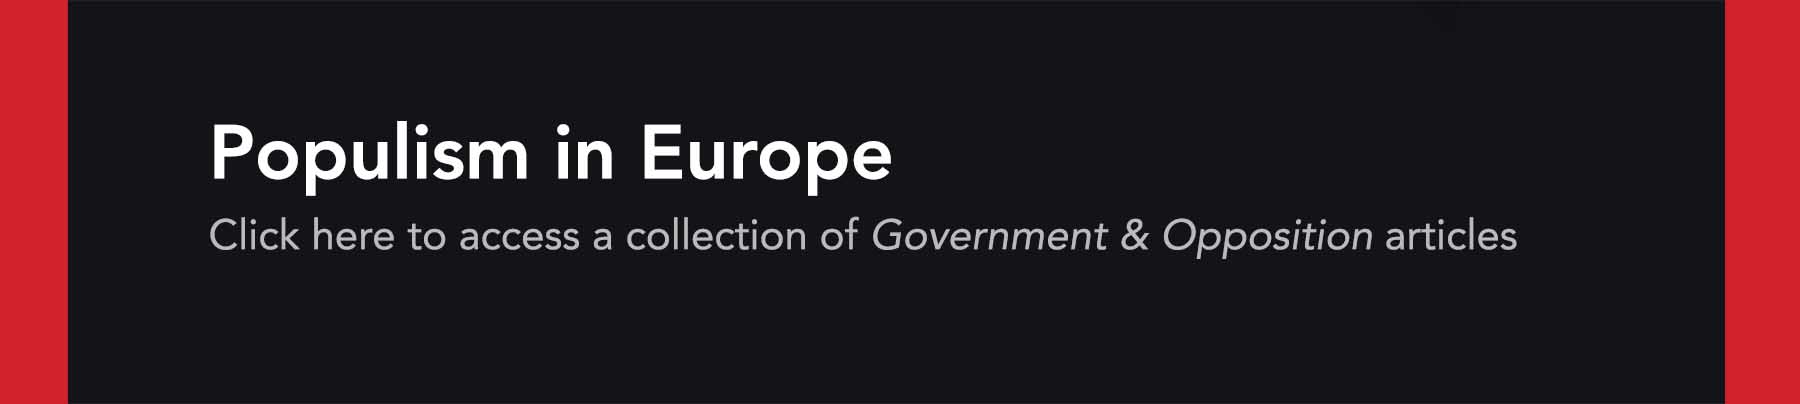 Populism in Europe collection banner